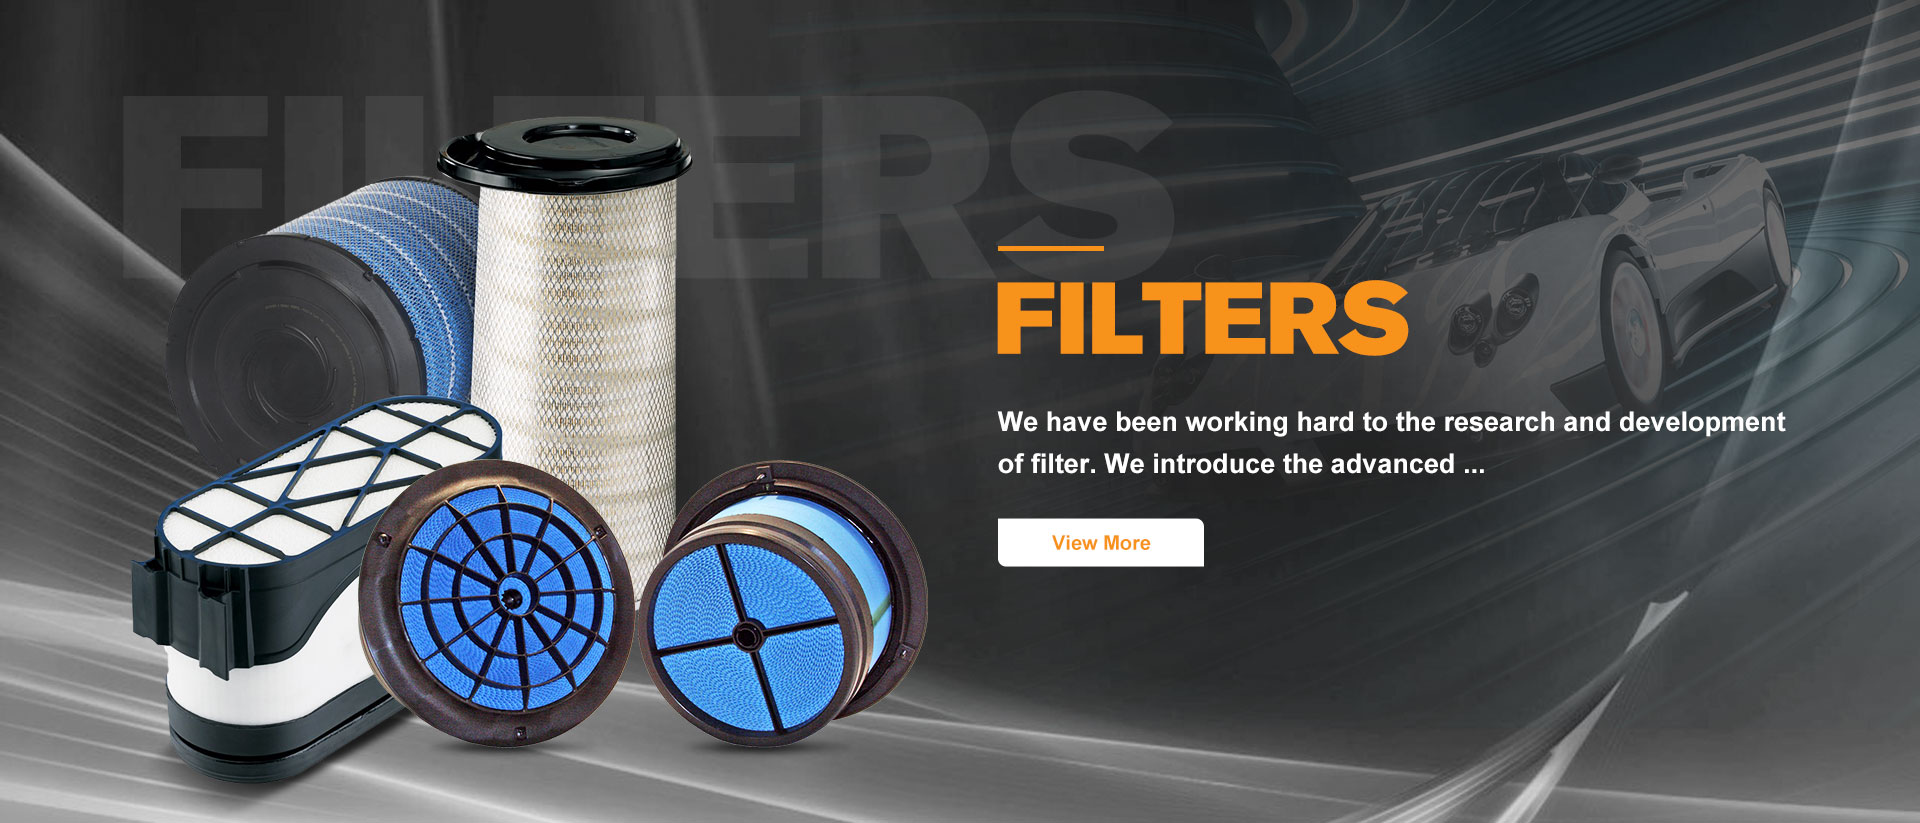 Tips for A Successful Diesel Fuel Filter Change On A Heavy-Duty Truck